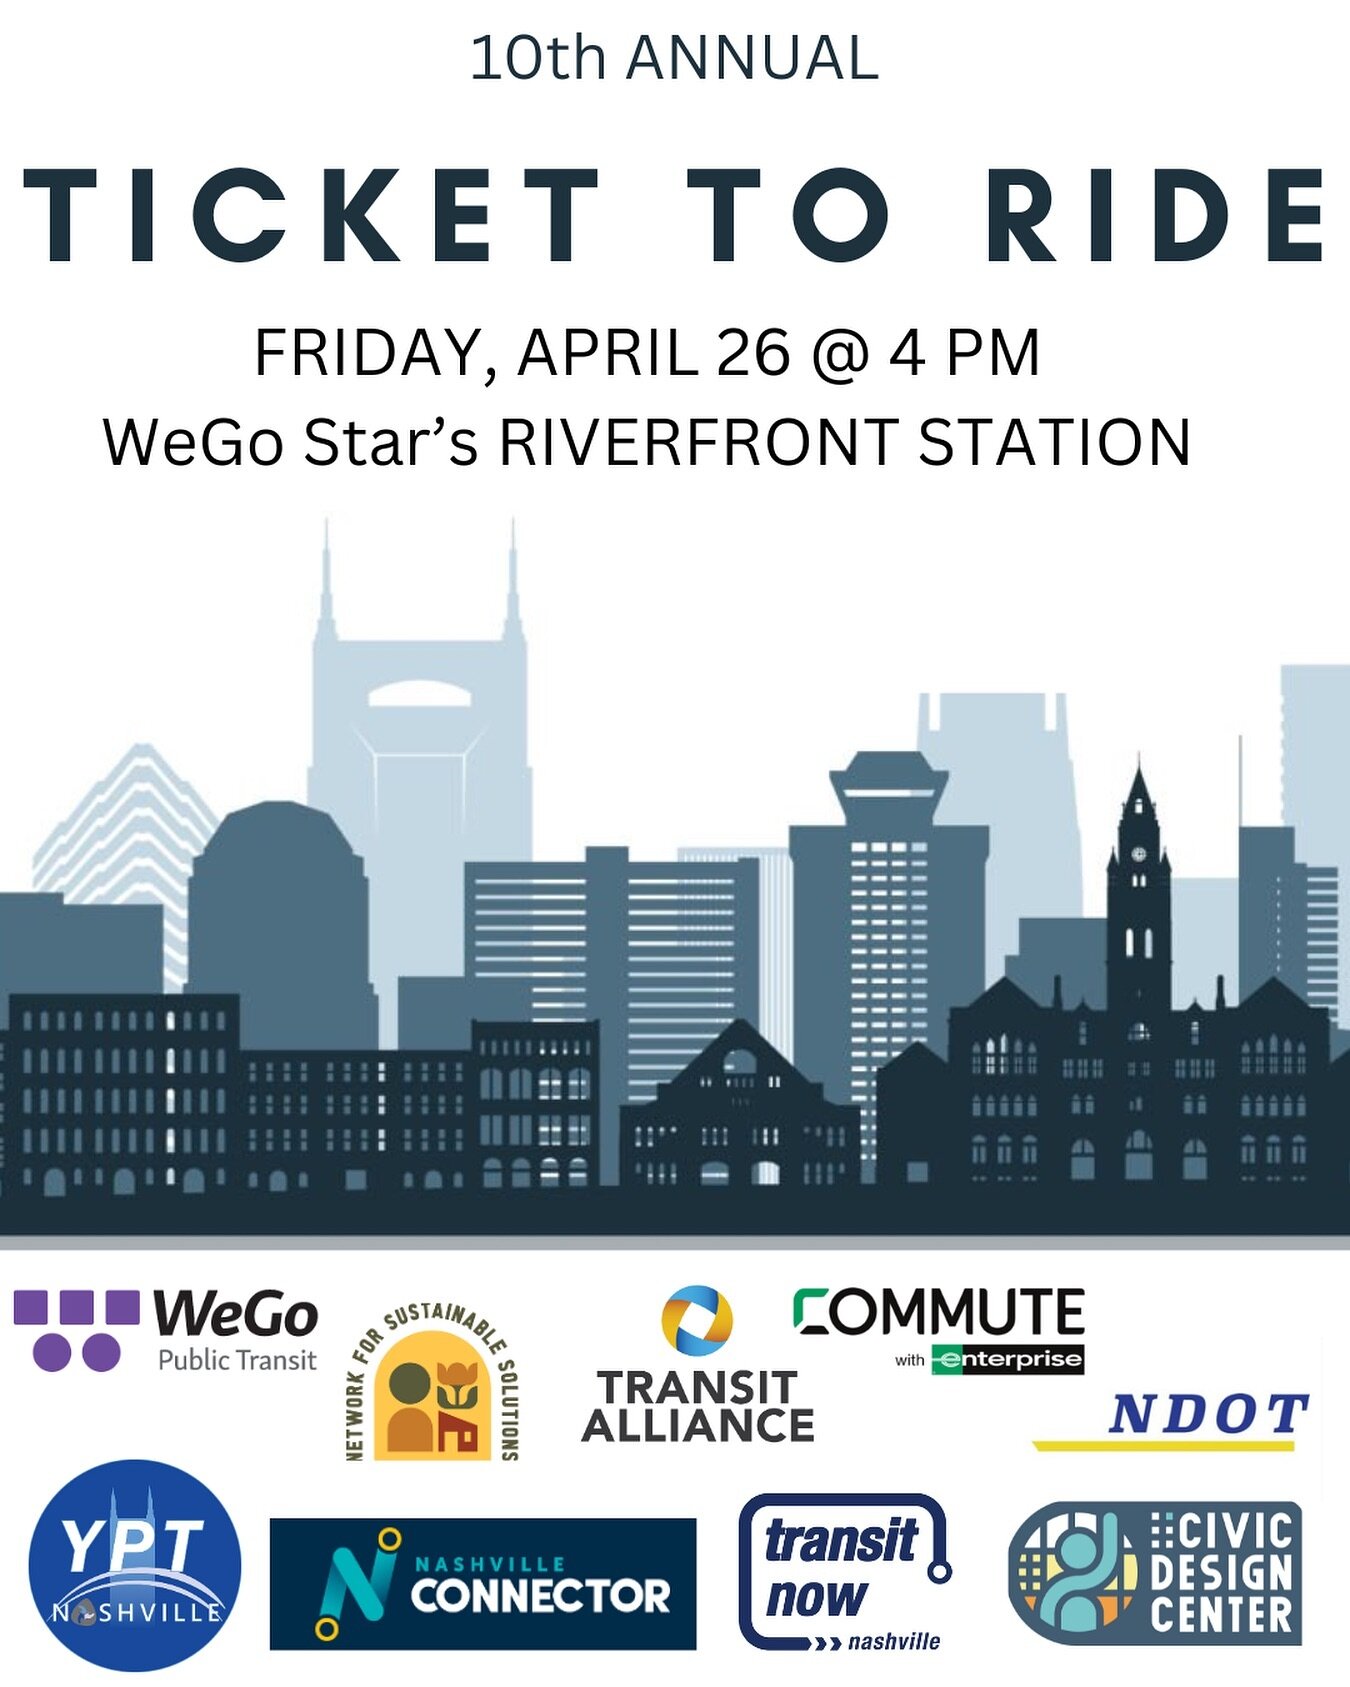 April is Transit Month! Ride the @wegotransit Star for free to Ticket to Ride on April 26 - Link in Bio💥
.
Celebrate with us for the 10th year of events on the WeGo Star Passenger Rail. Admission and train passes are free, but registration is requir